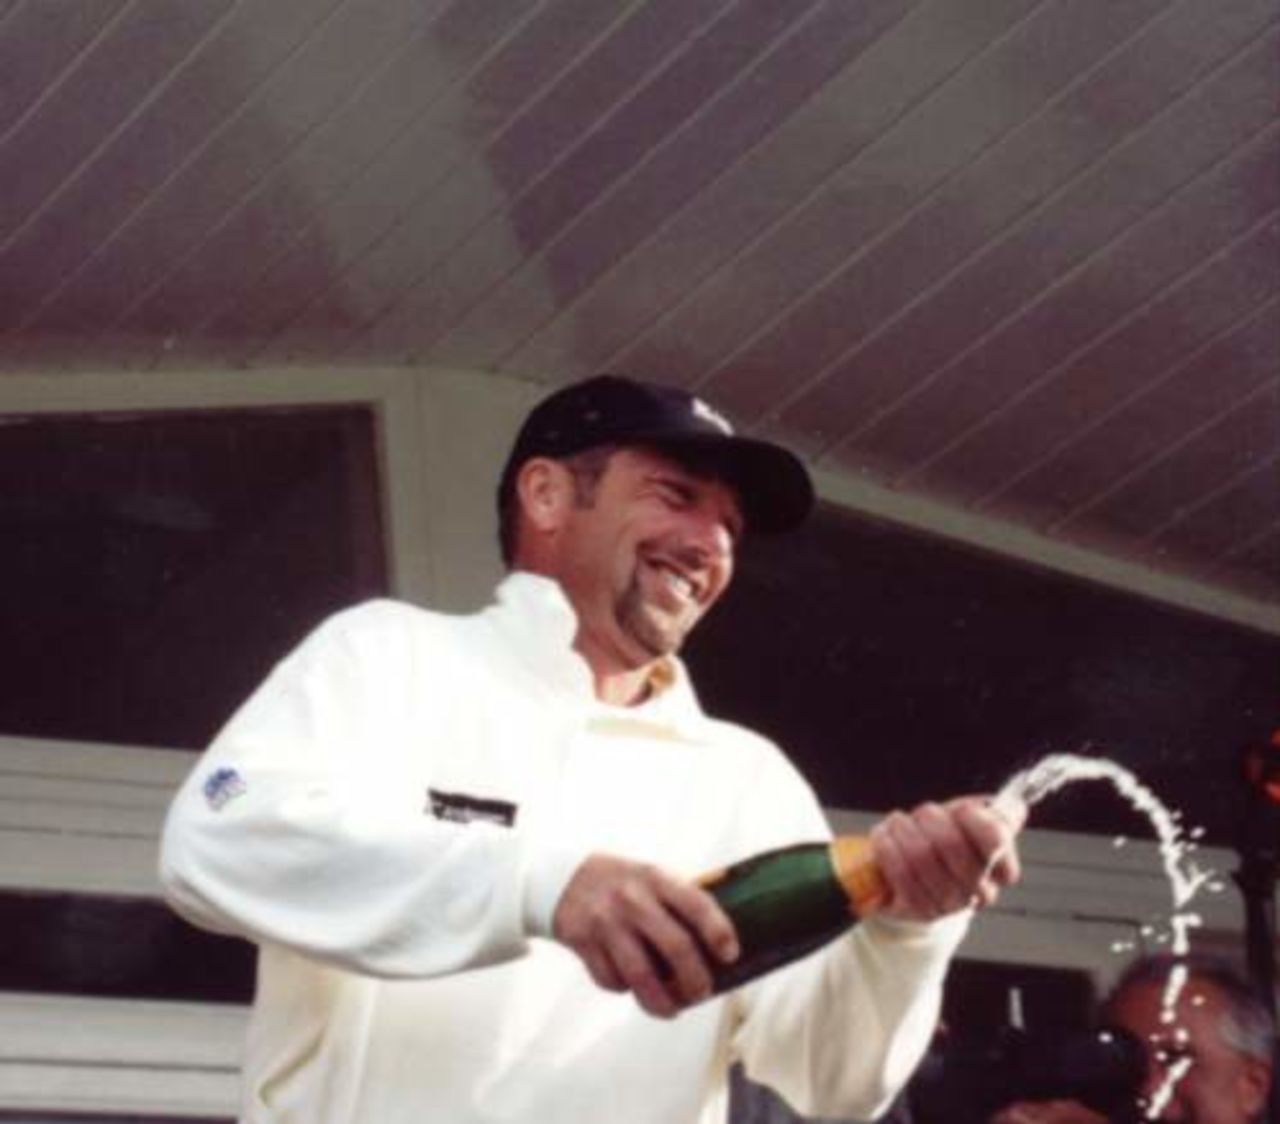 Matthew Maynard celebrates on the balcony at Sophia Gardens in Sept. 2000 after Glamorgan gain promotion to Division One of the County Championship in 2001